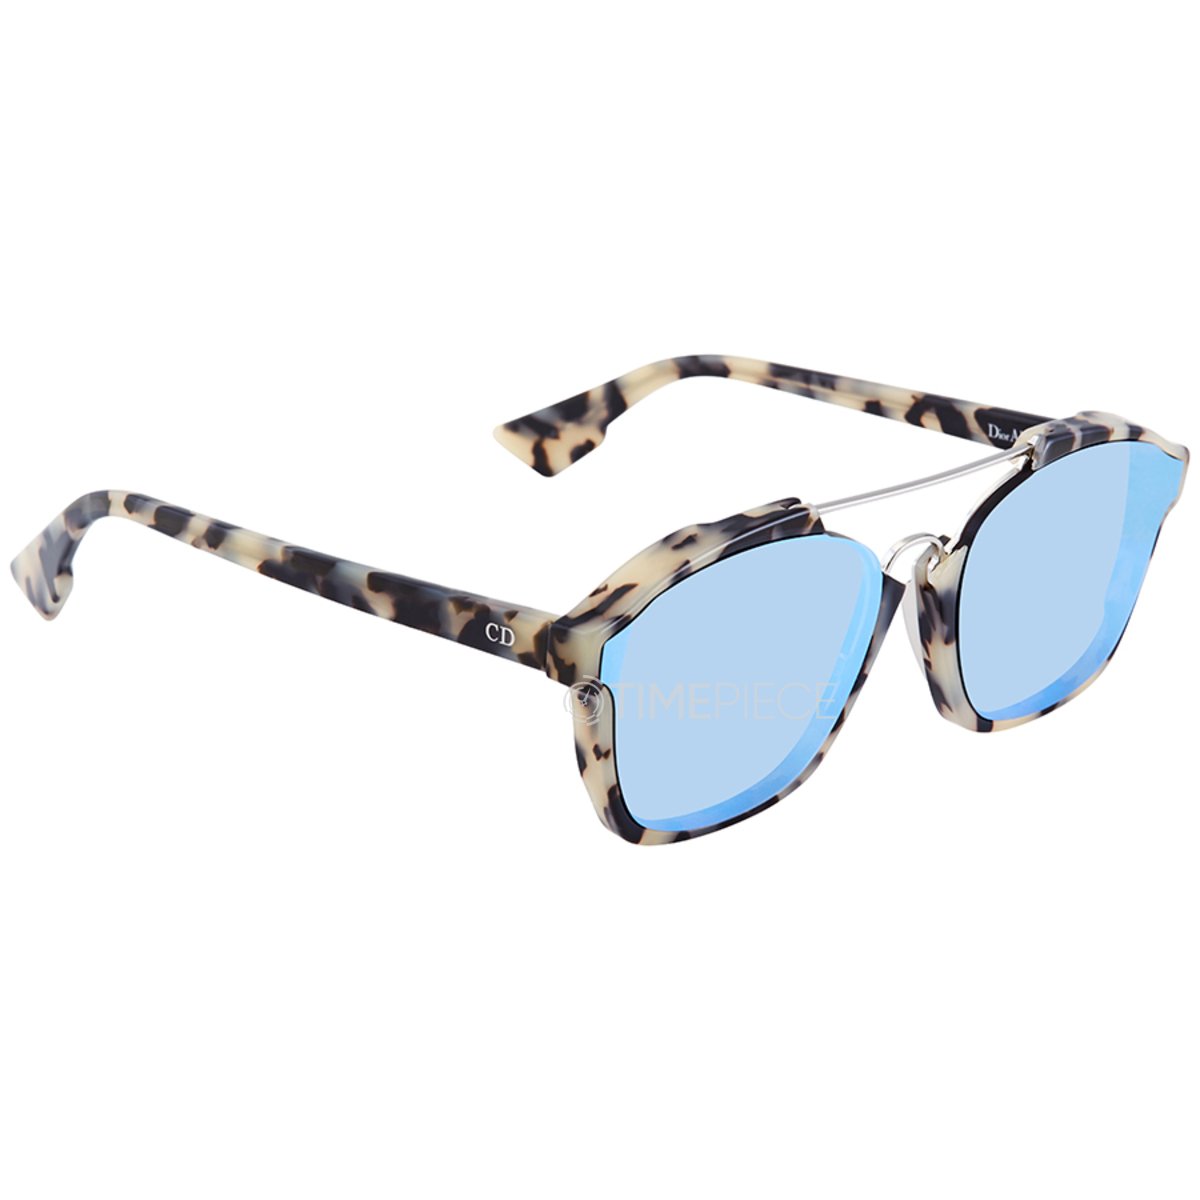 Christian Dior Abstract Sunglasses in Grey Tortoiseshell with Mirrored Lens.jpg